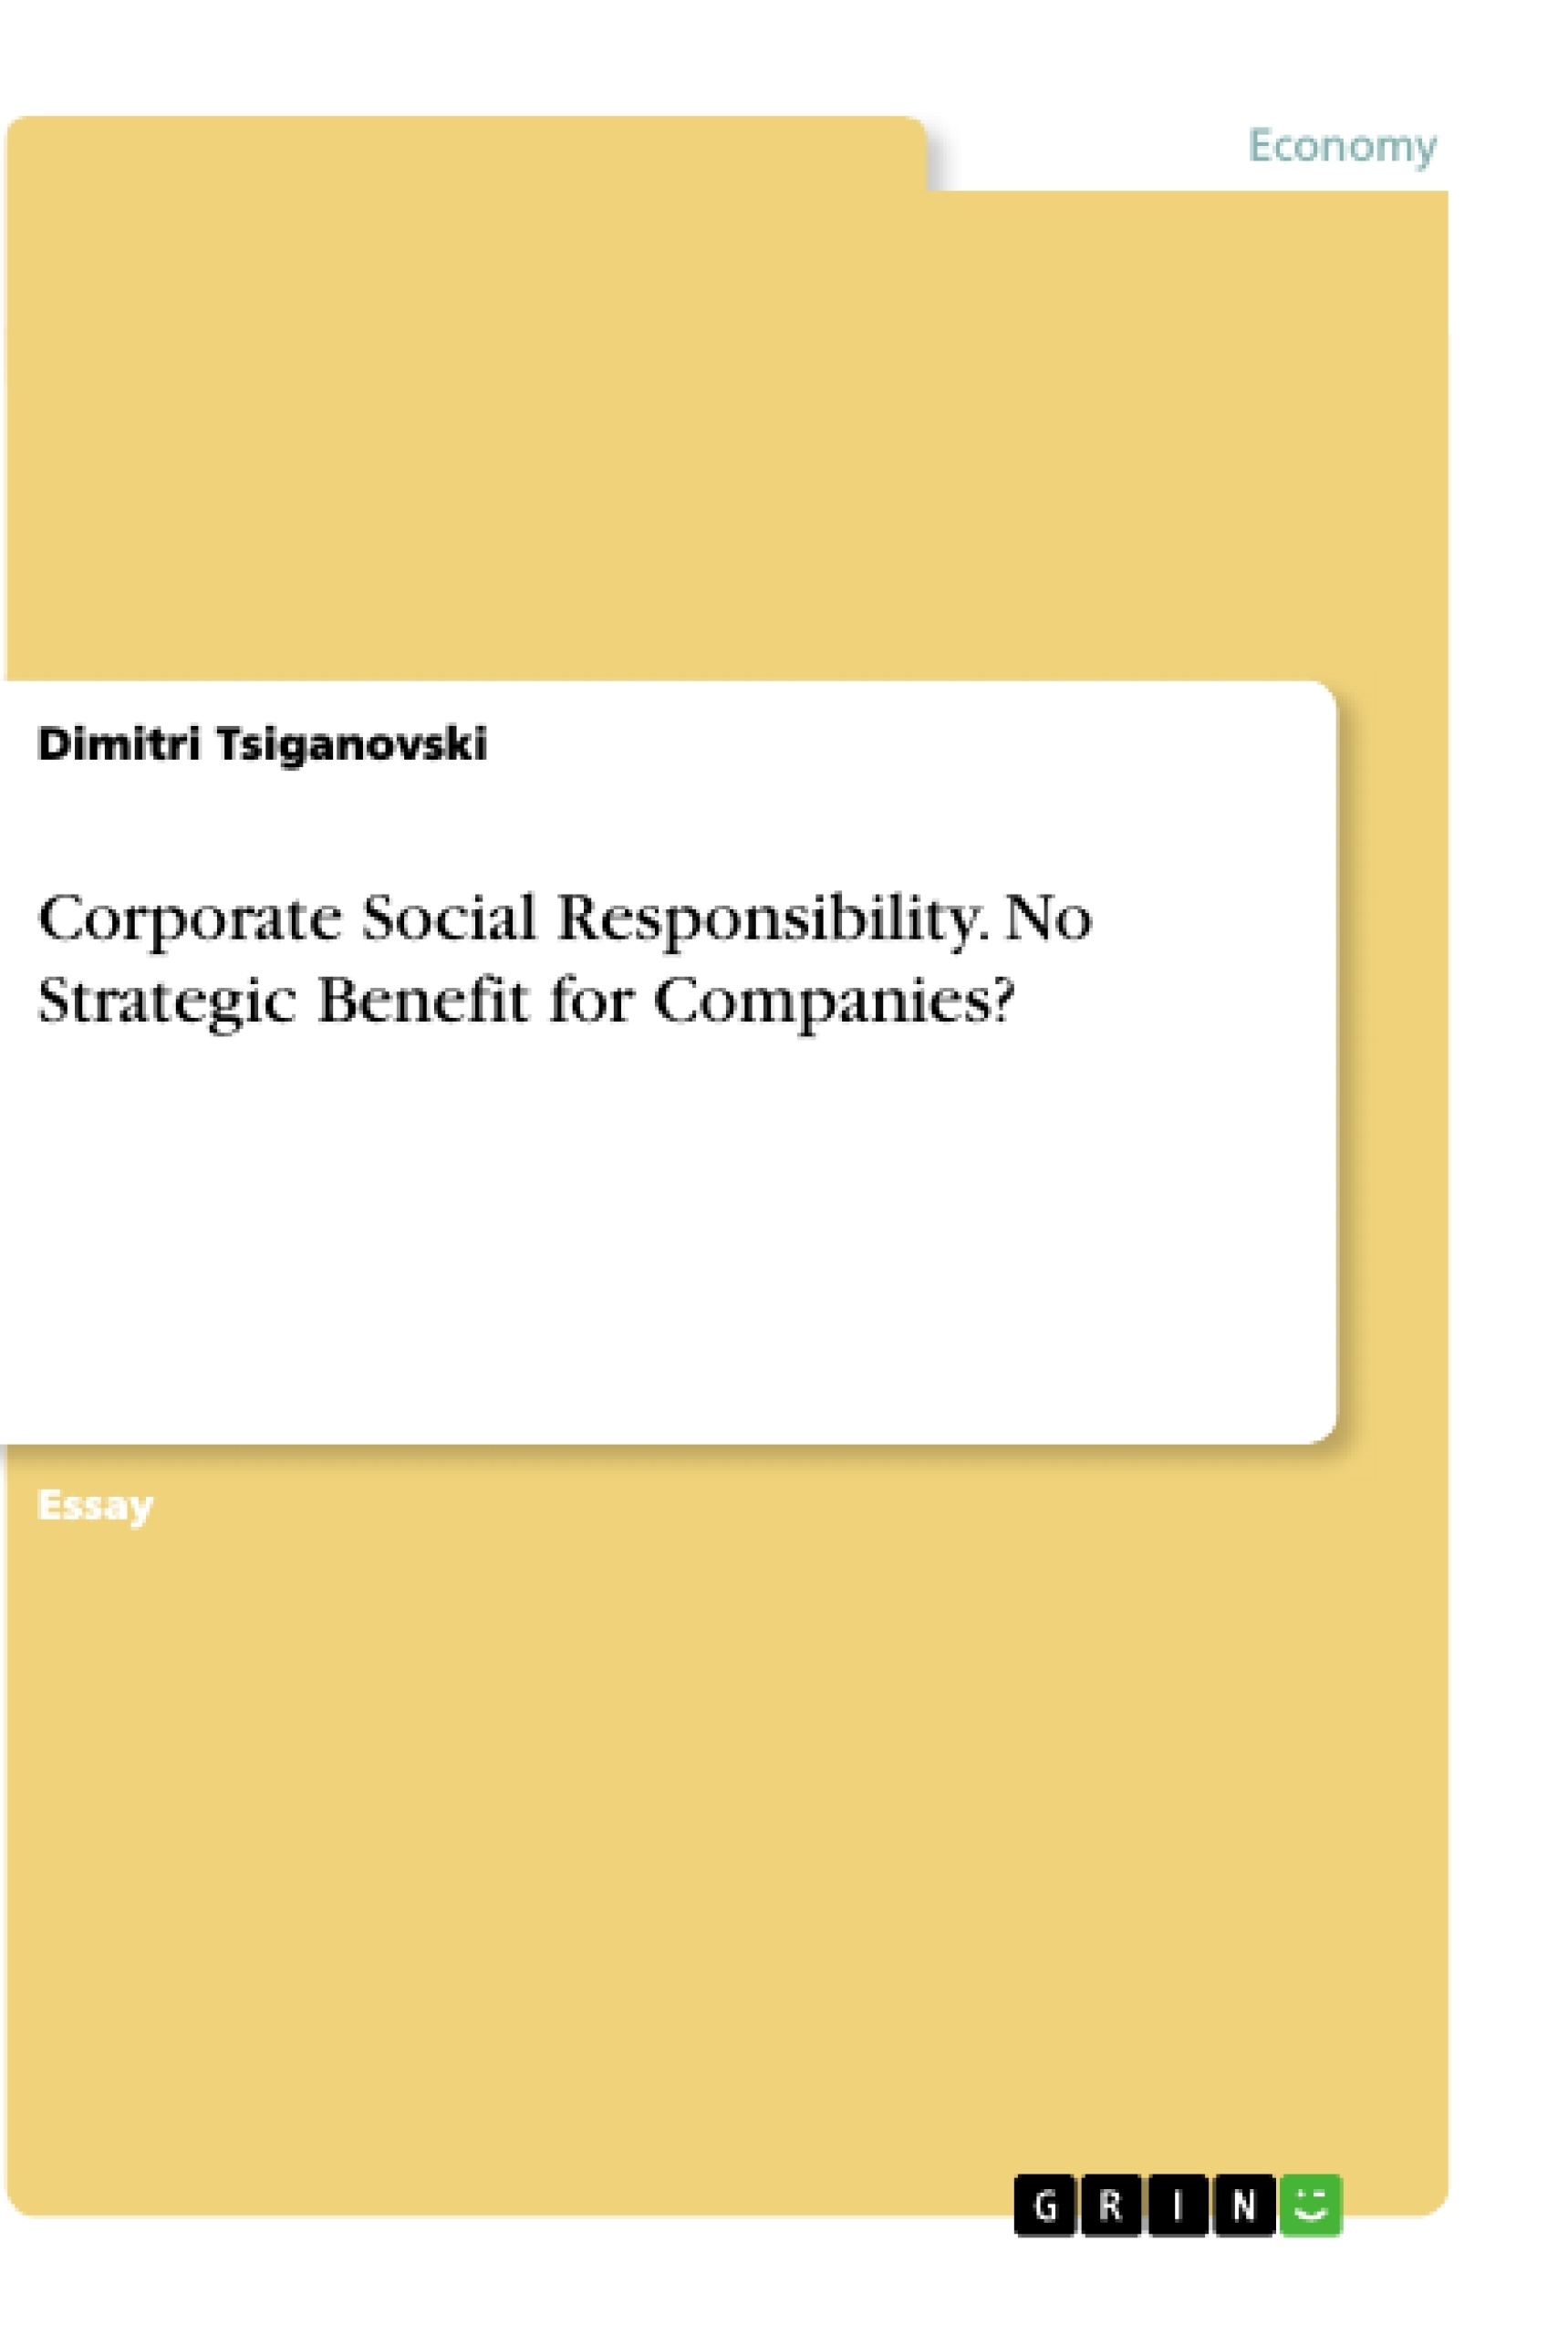 Title: Corporate Social Responsibility. No Strategic Benefit for Companies?